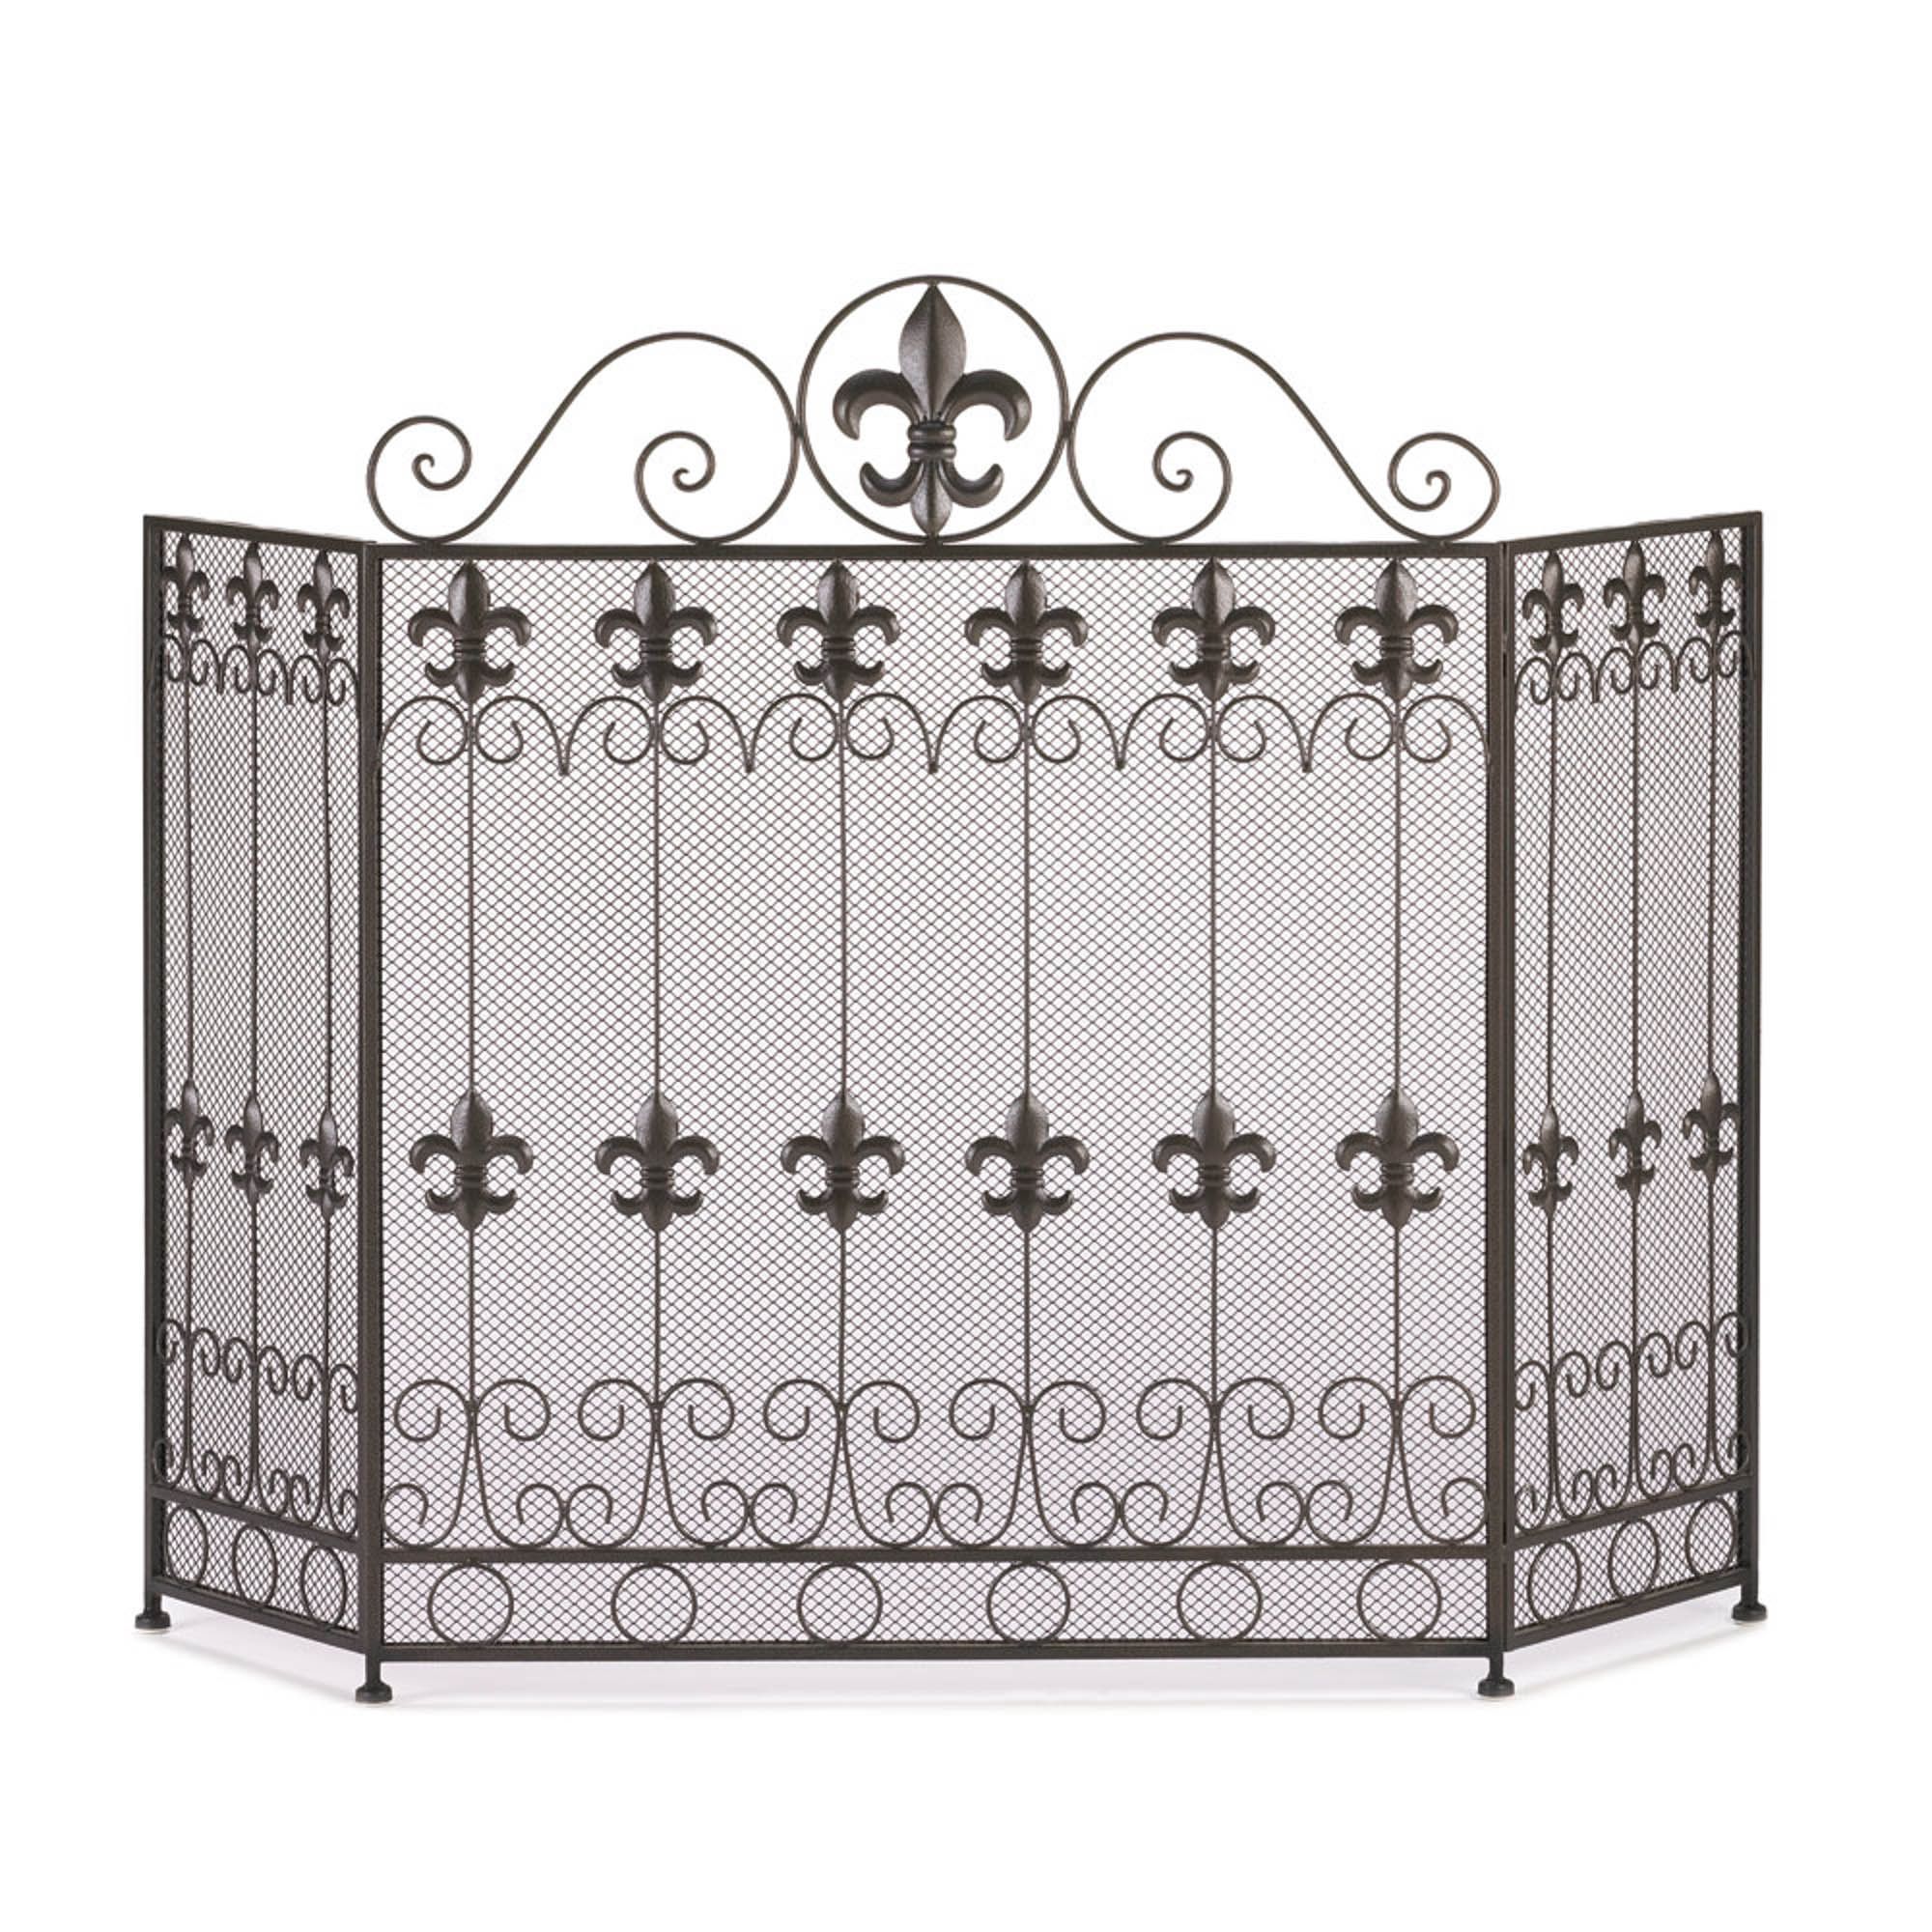 Zingz & Thingz 33.25" Black and Gray French Revival Fireplace Screen - image 1 of 2